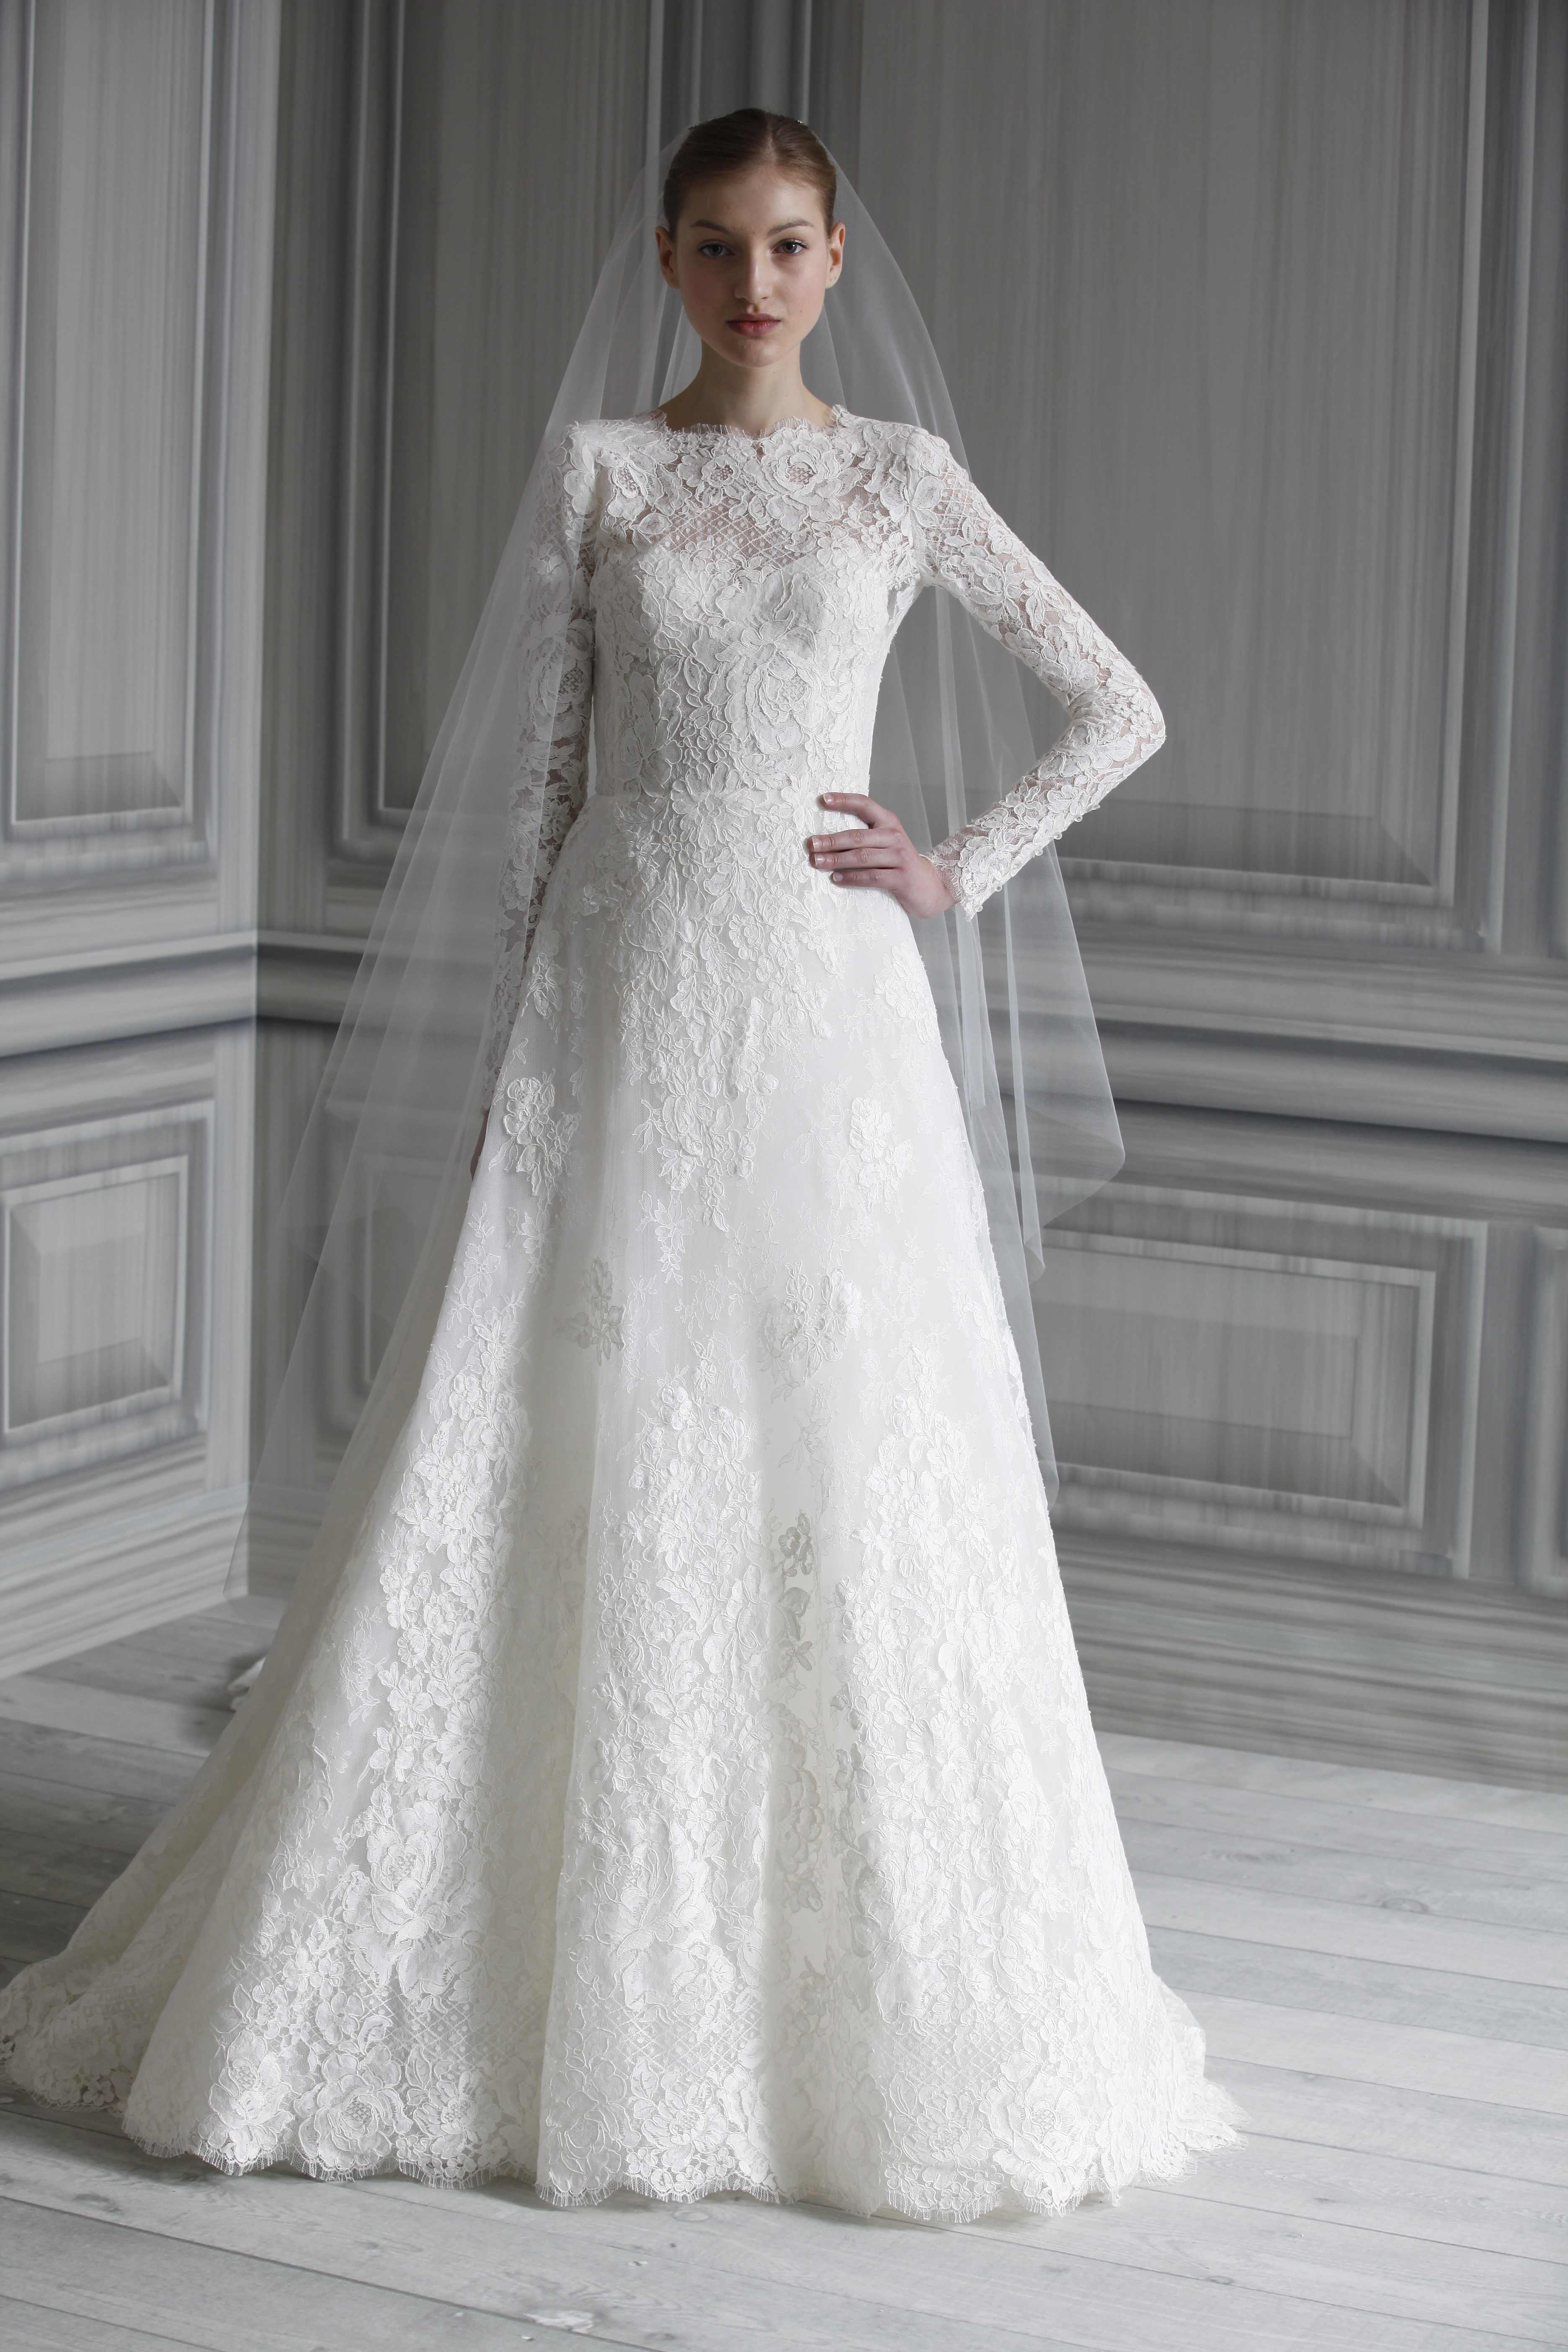 full sleeve bridal gowns